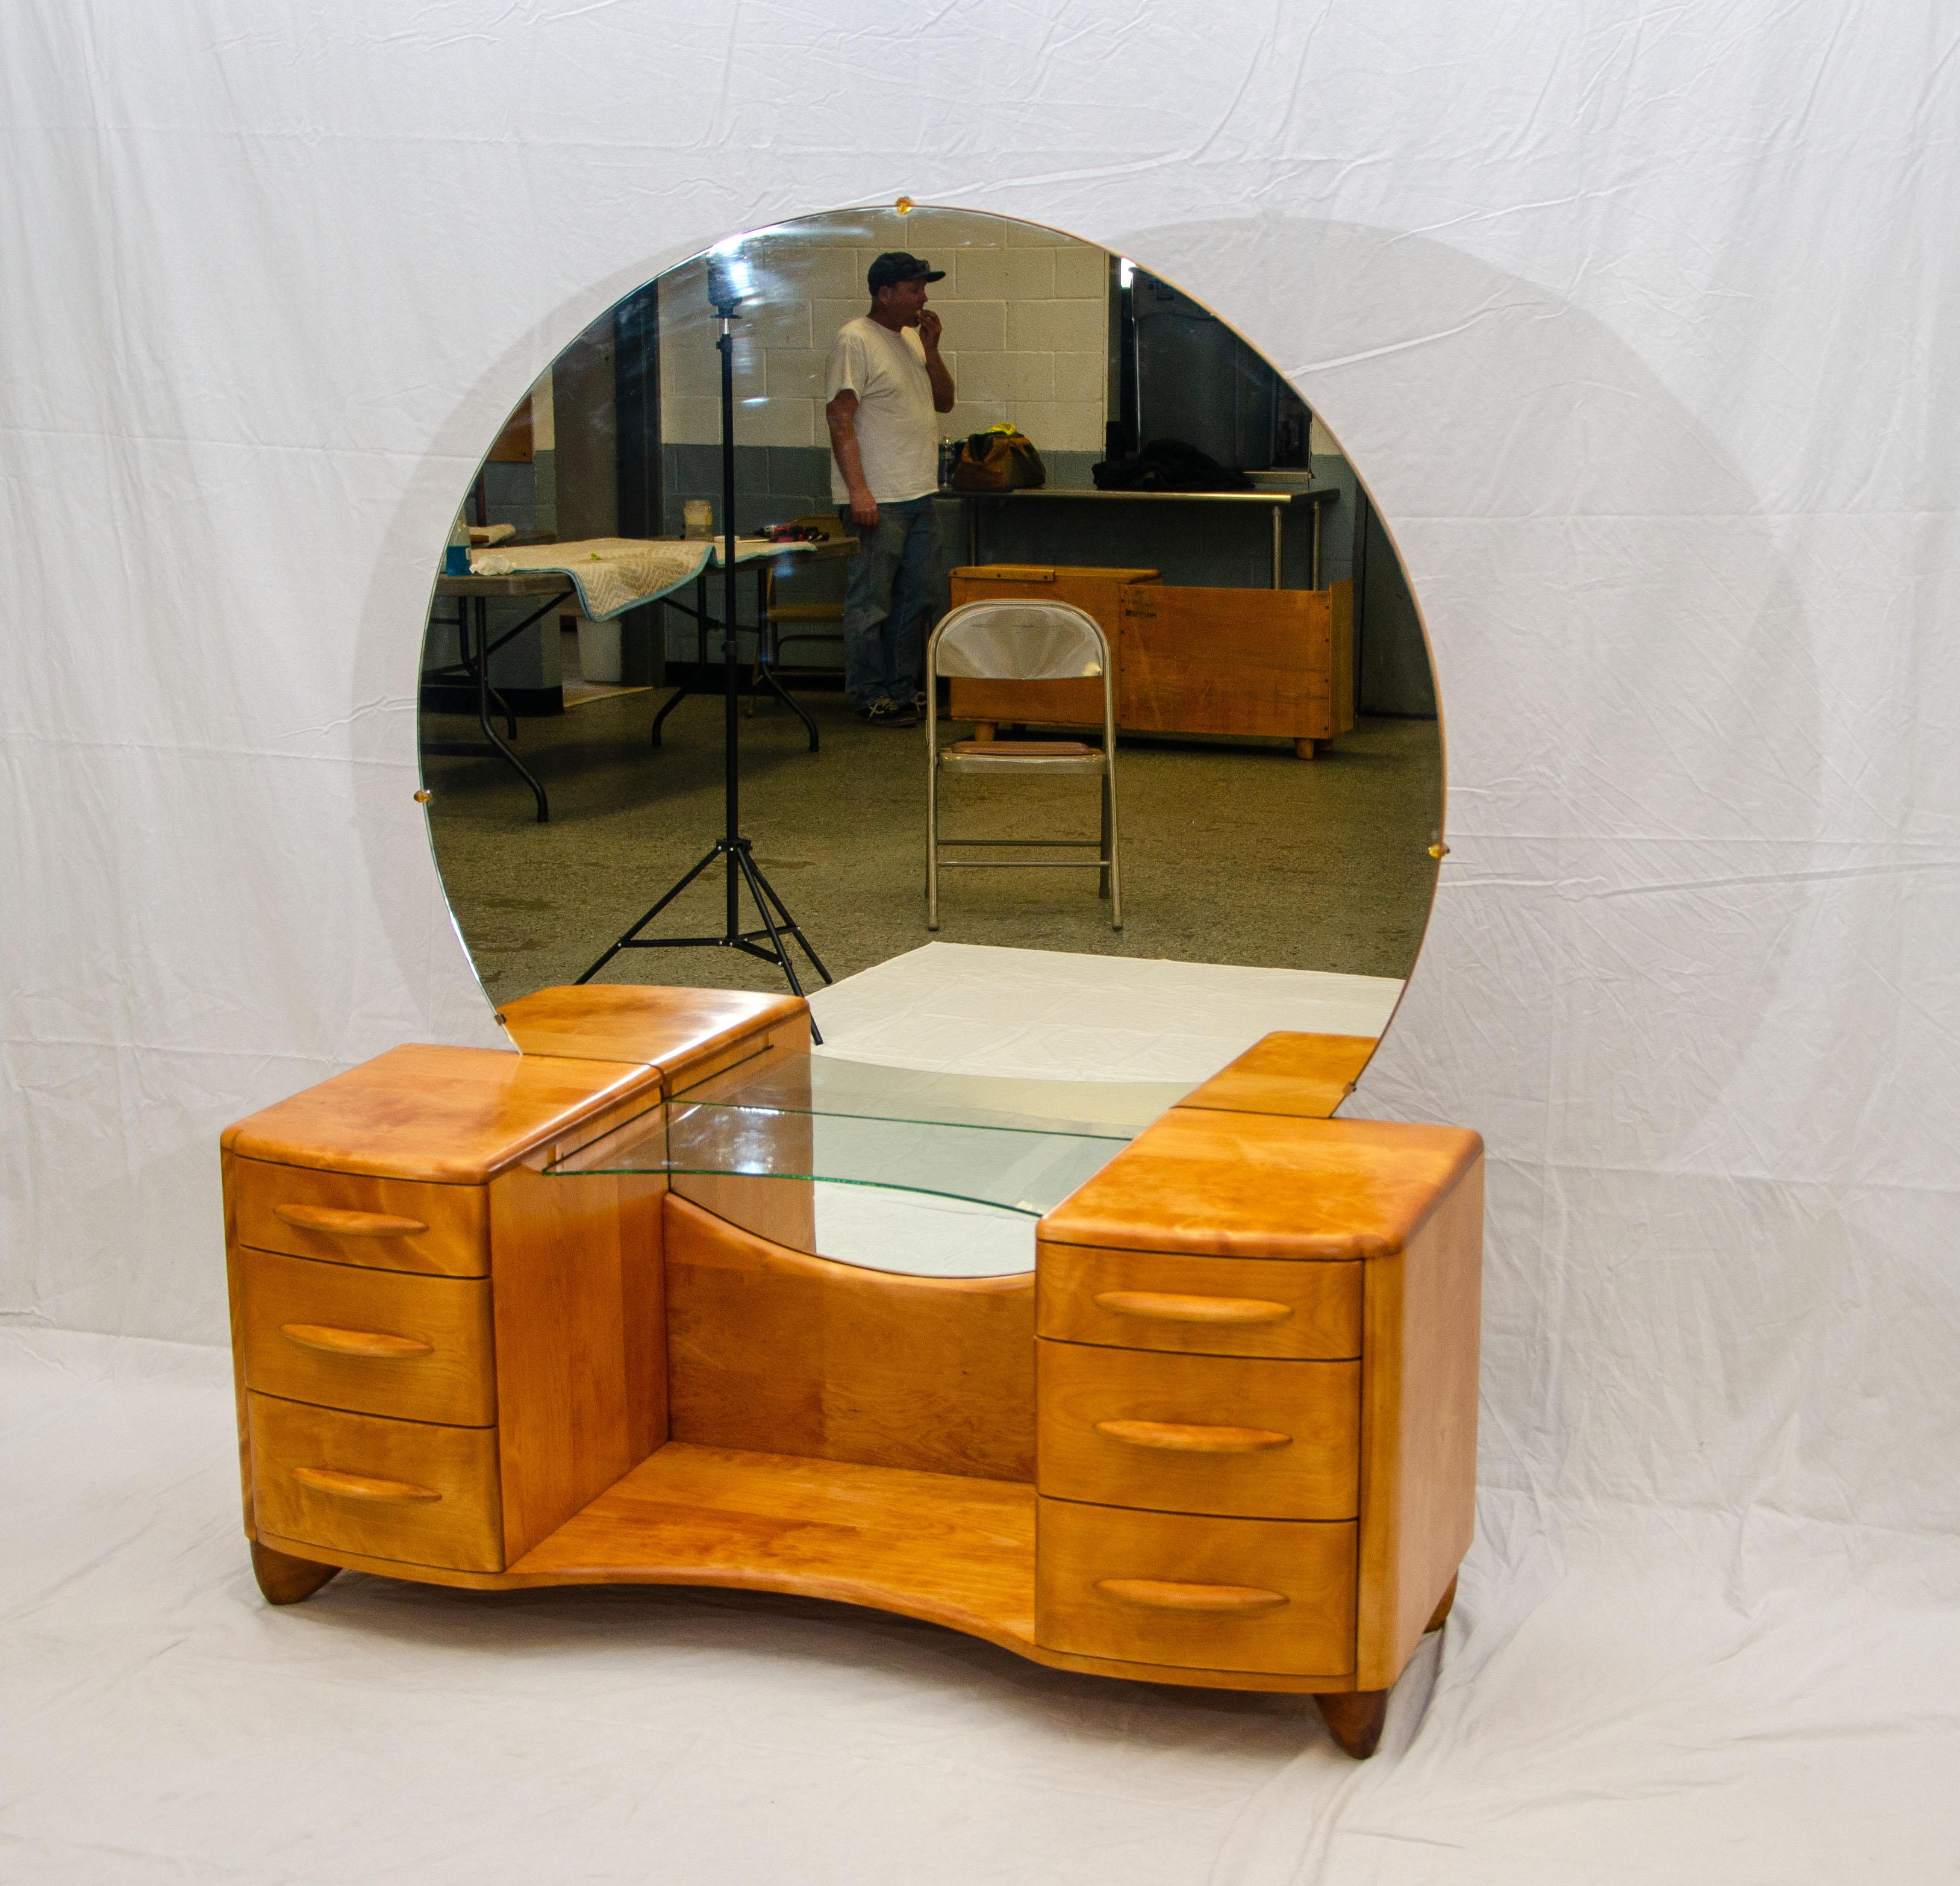 The plaza vanity was manufactured in 1940, it has a curved front glass shelf and a beautiful round mirror that has a 48